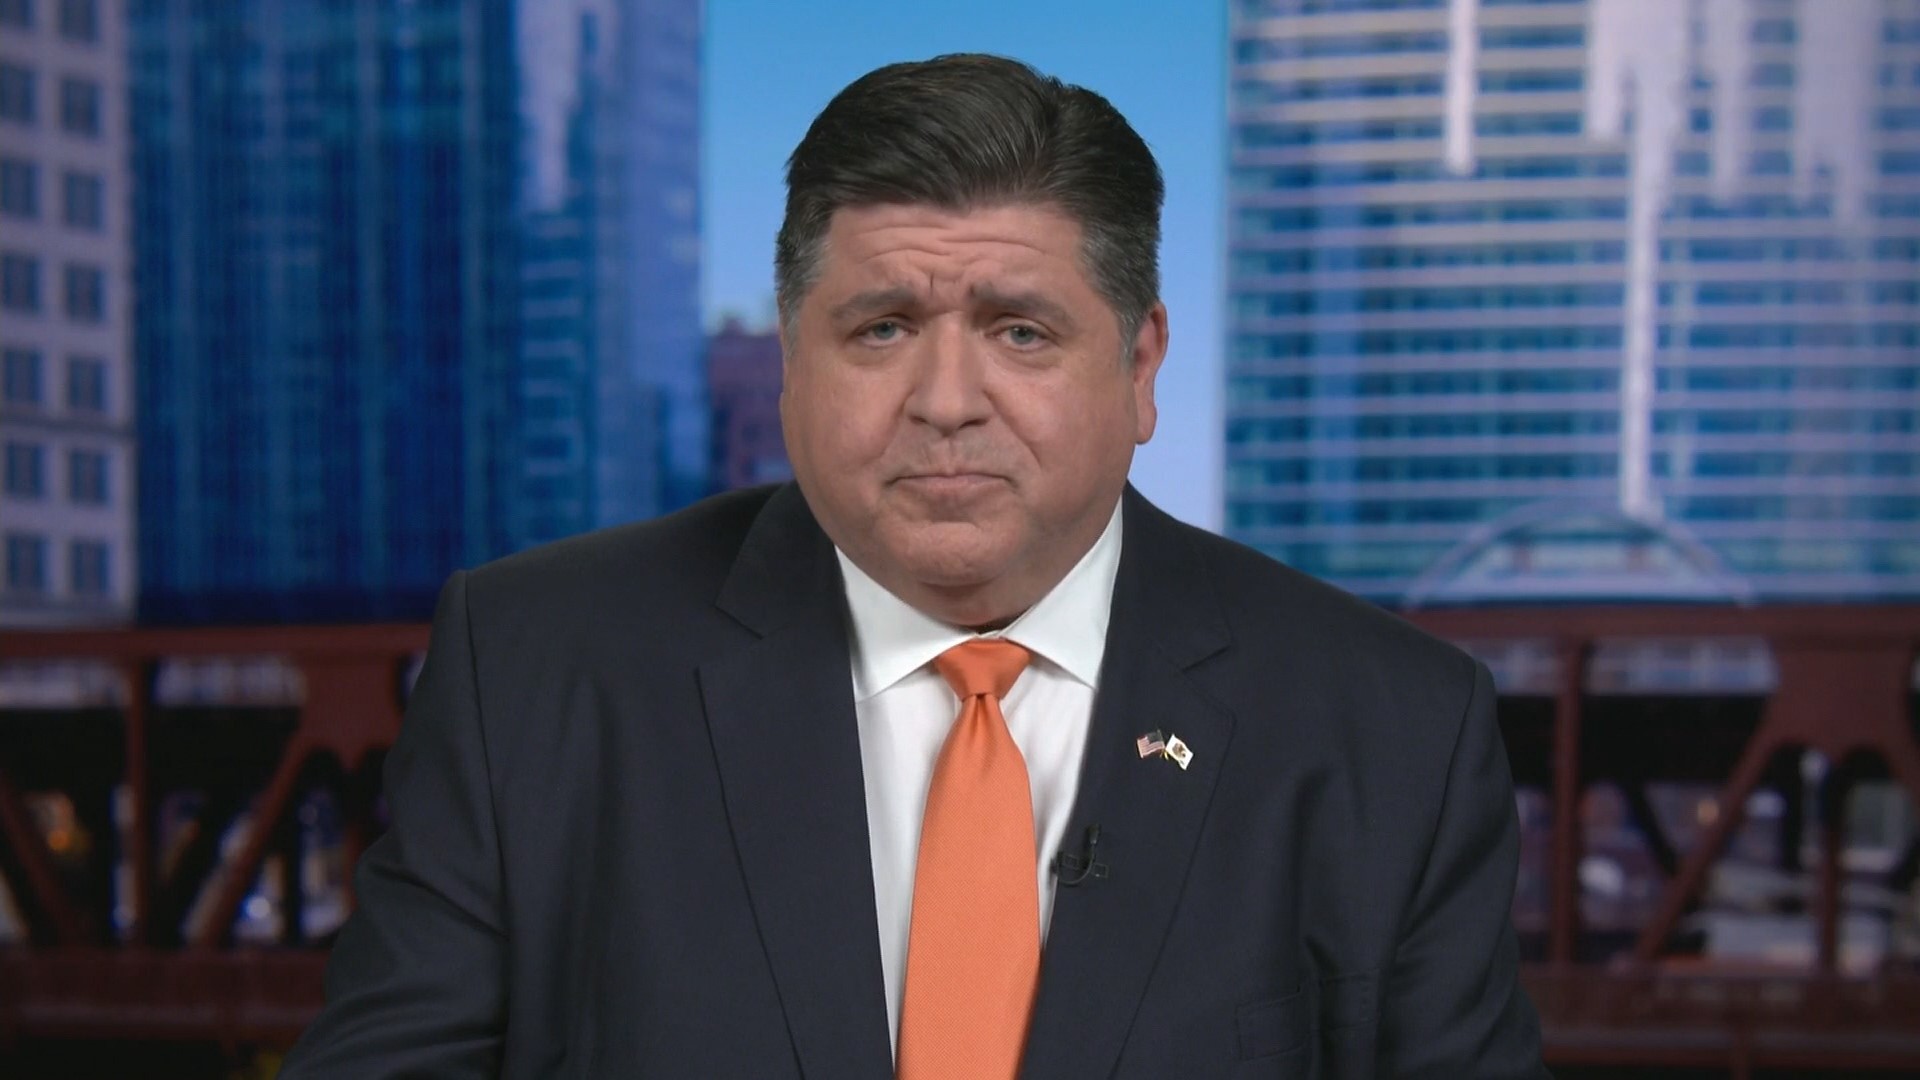 Gov. Pritzker says law enforcement are expected to uphold the law of the land. He spoke on CNN about the new assault weapon ban in Illinois.